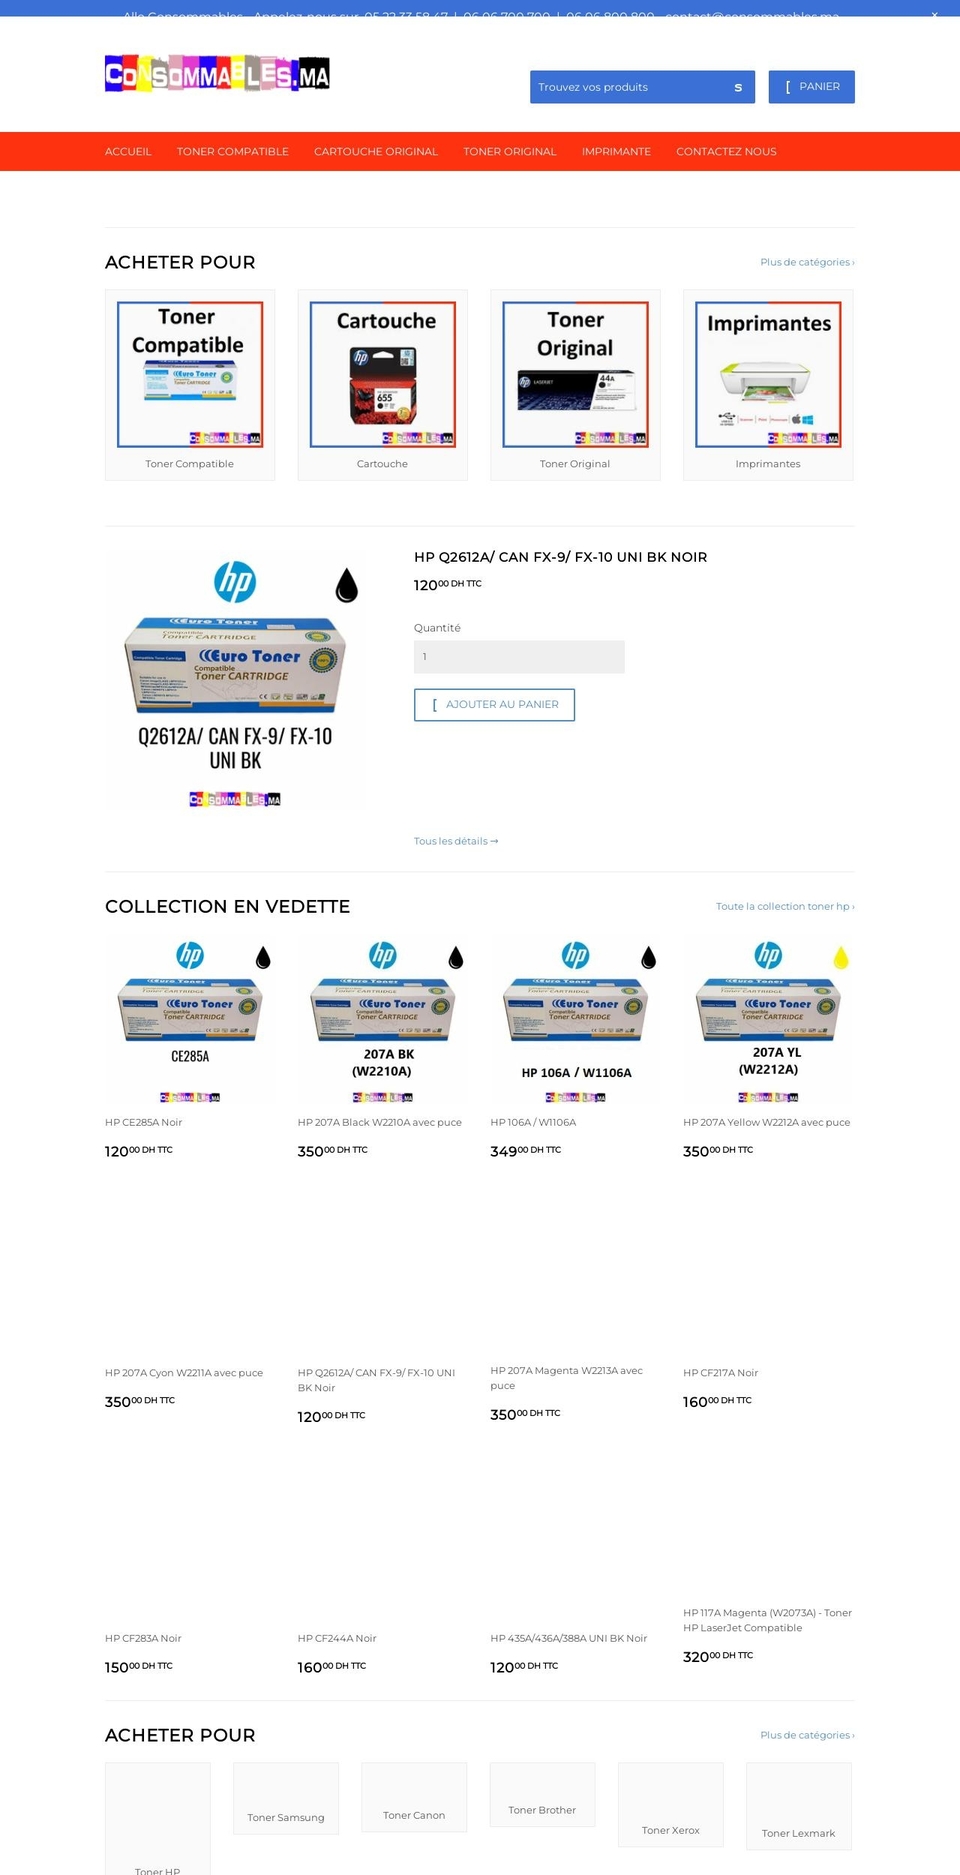 consommables.ma shopify website screenshot